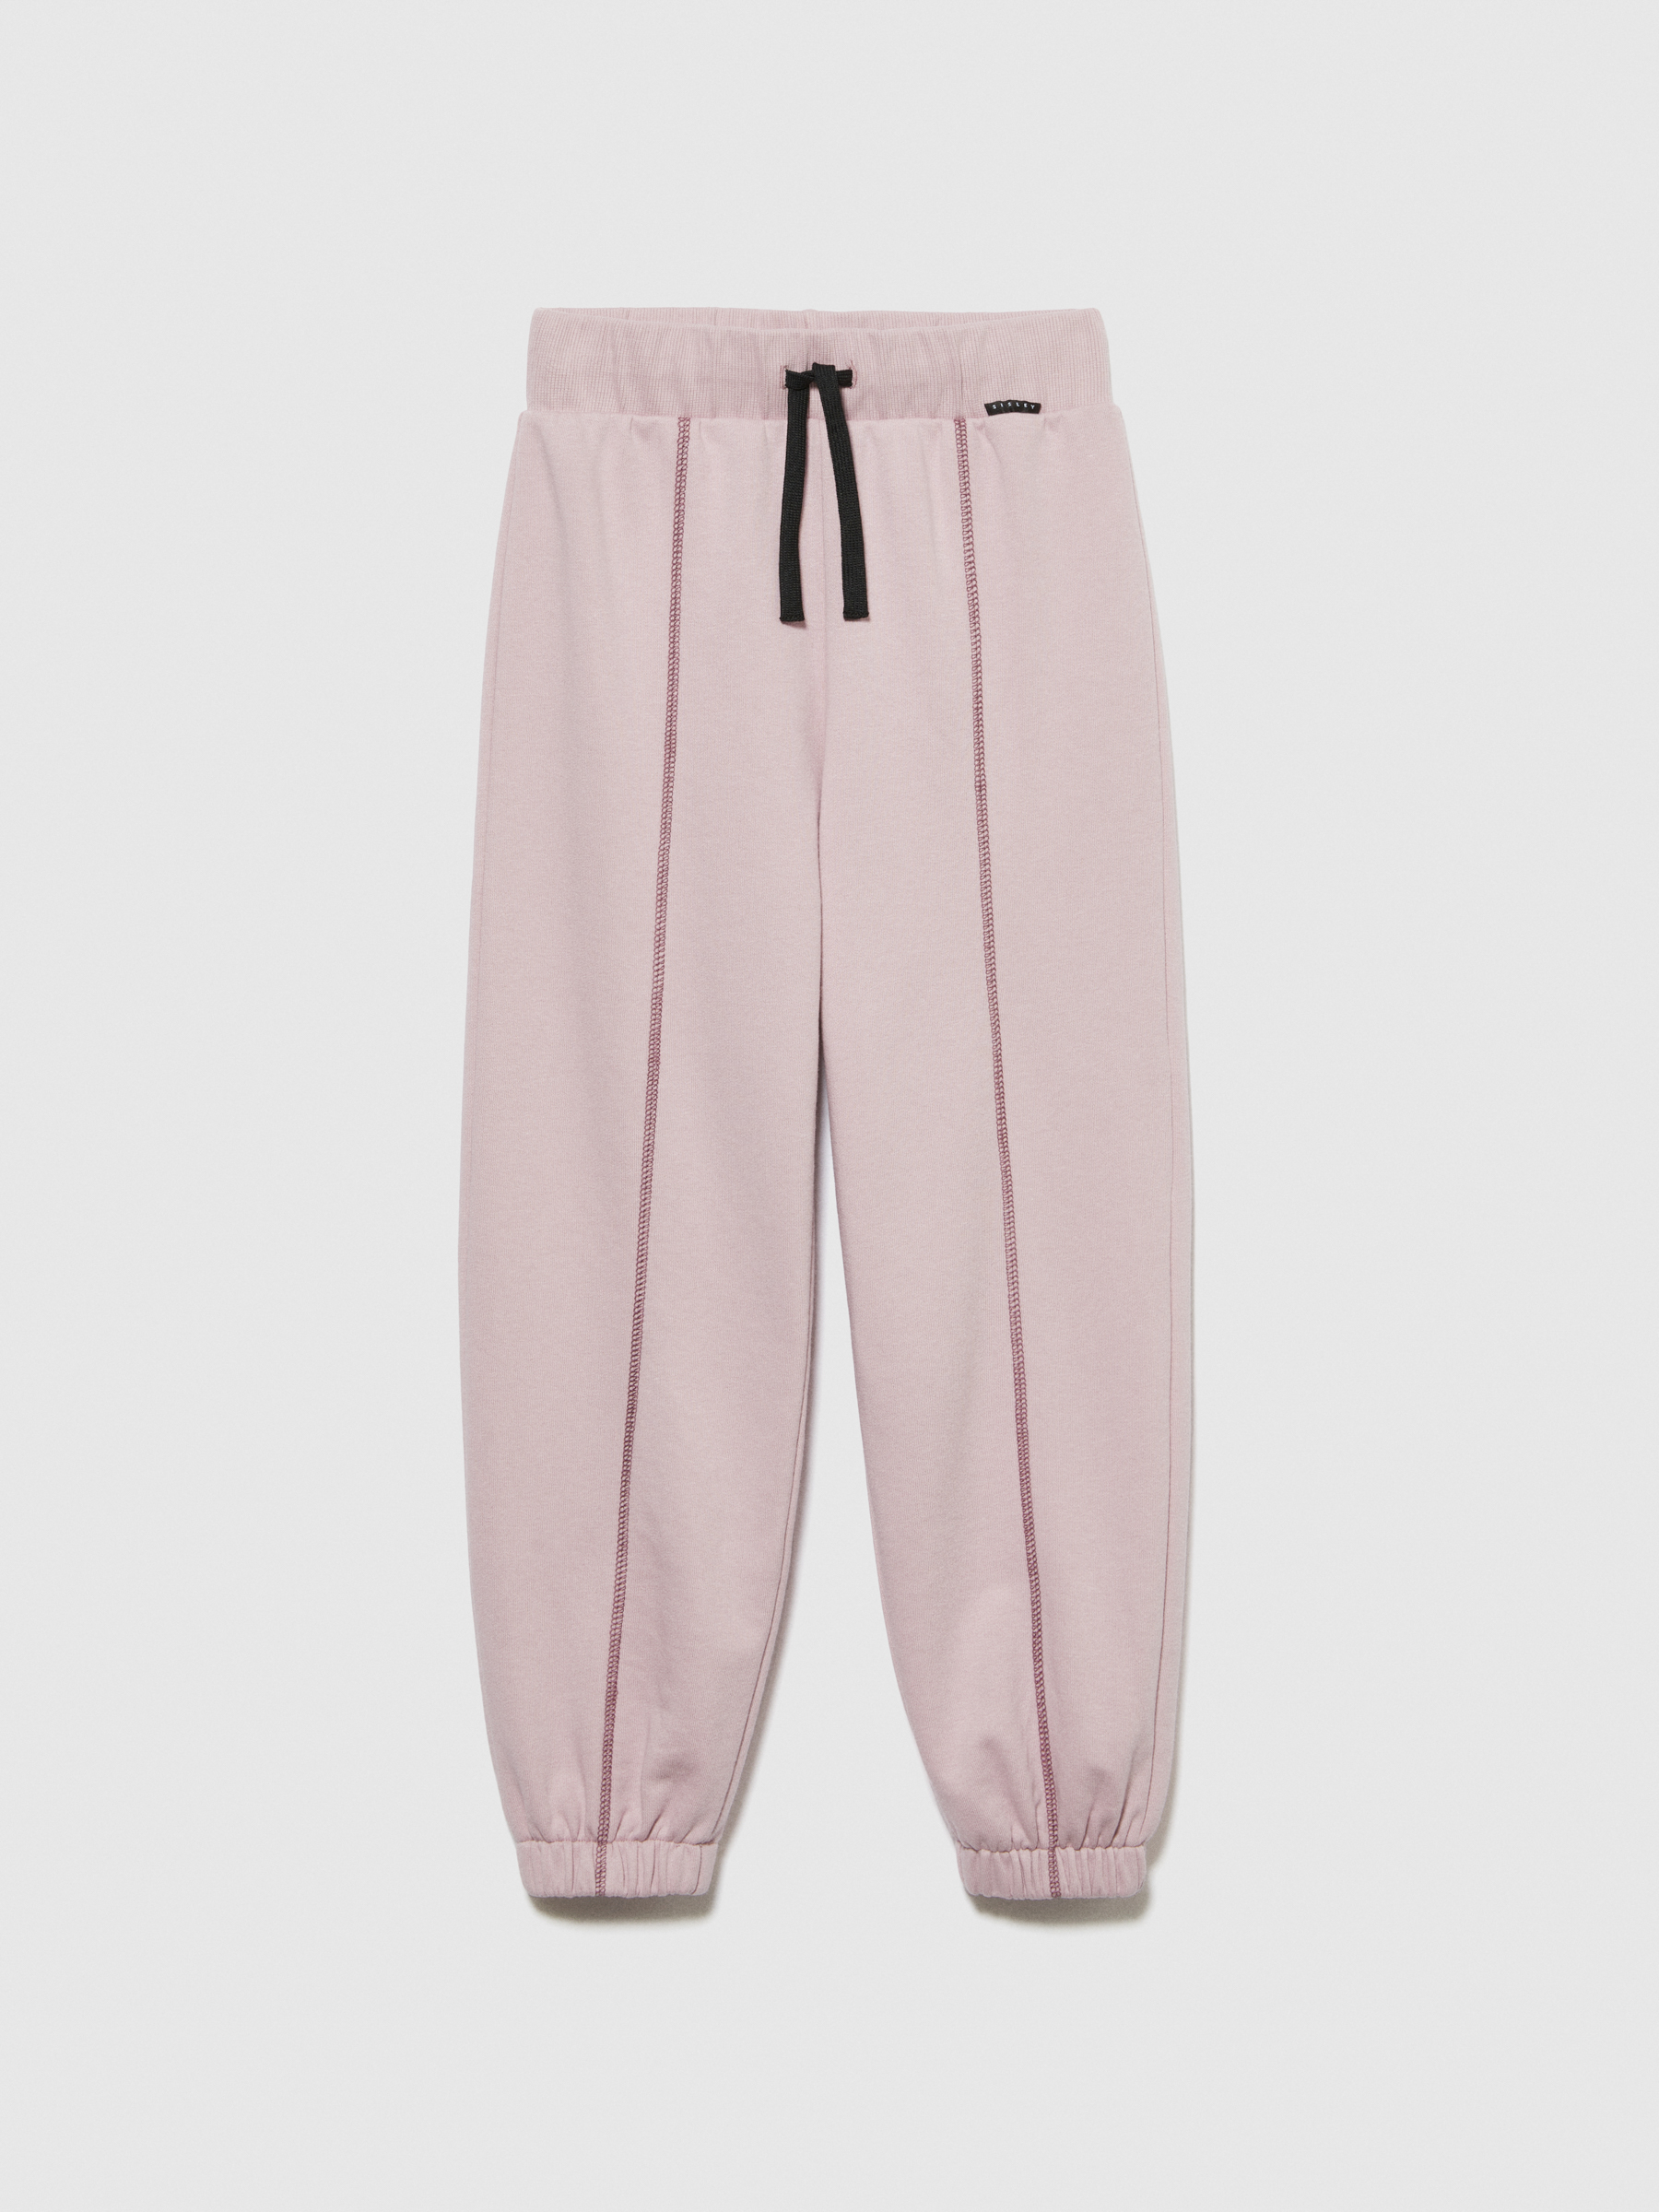 Sisley Young - Oversized Fit Joggers, Woman, Pink, Size: XS